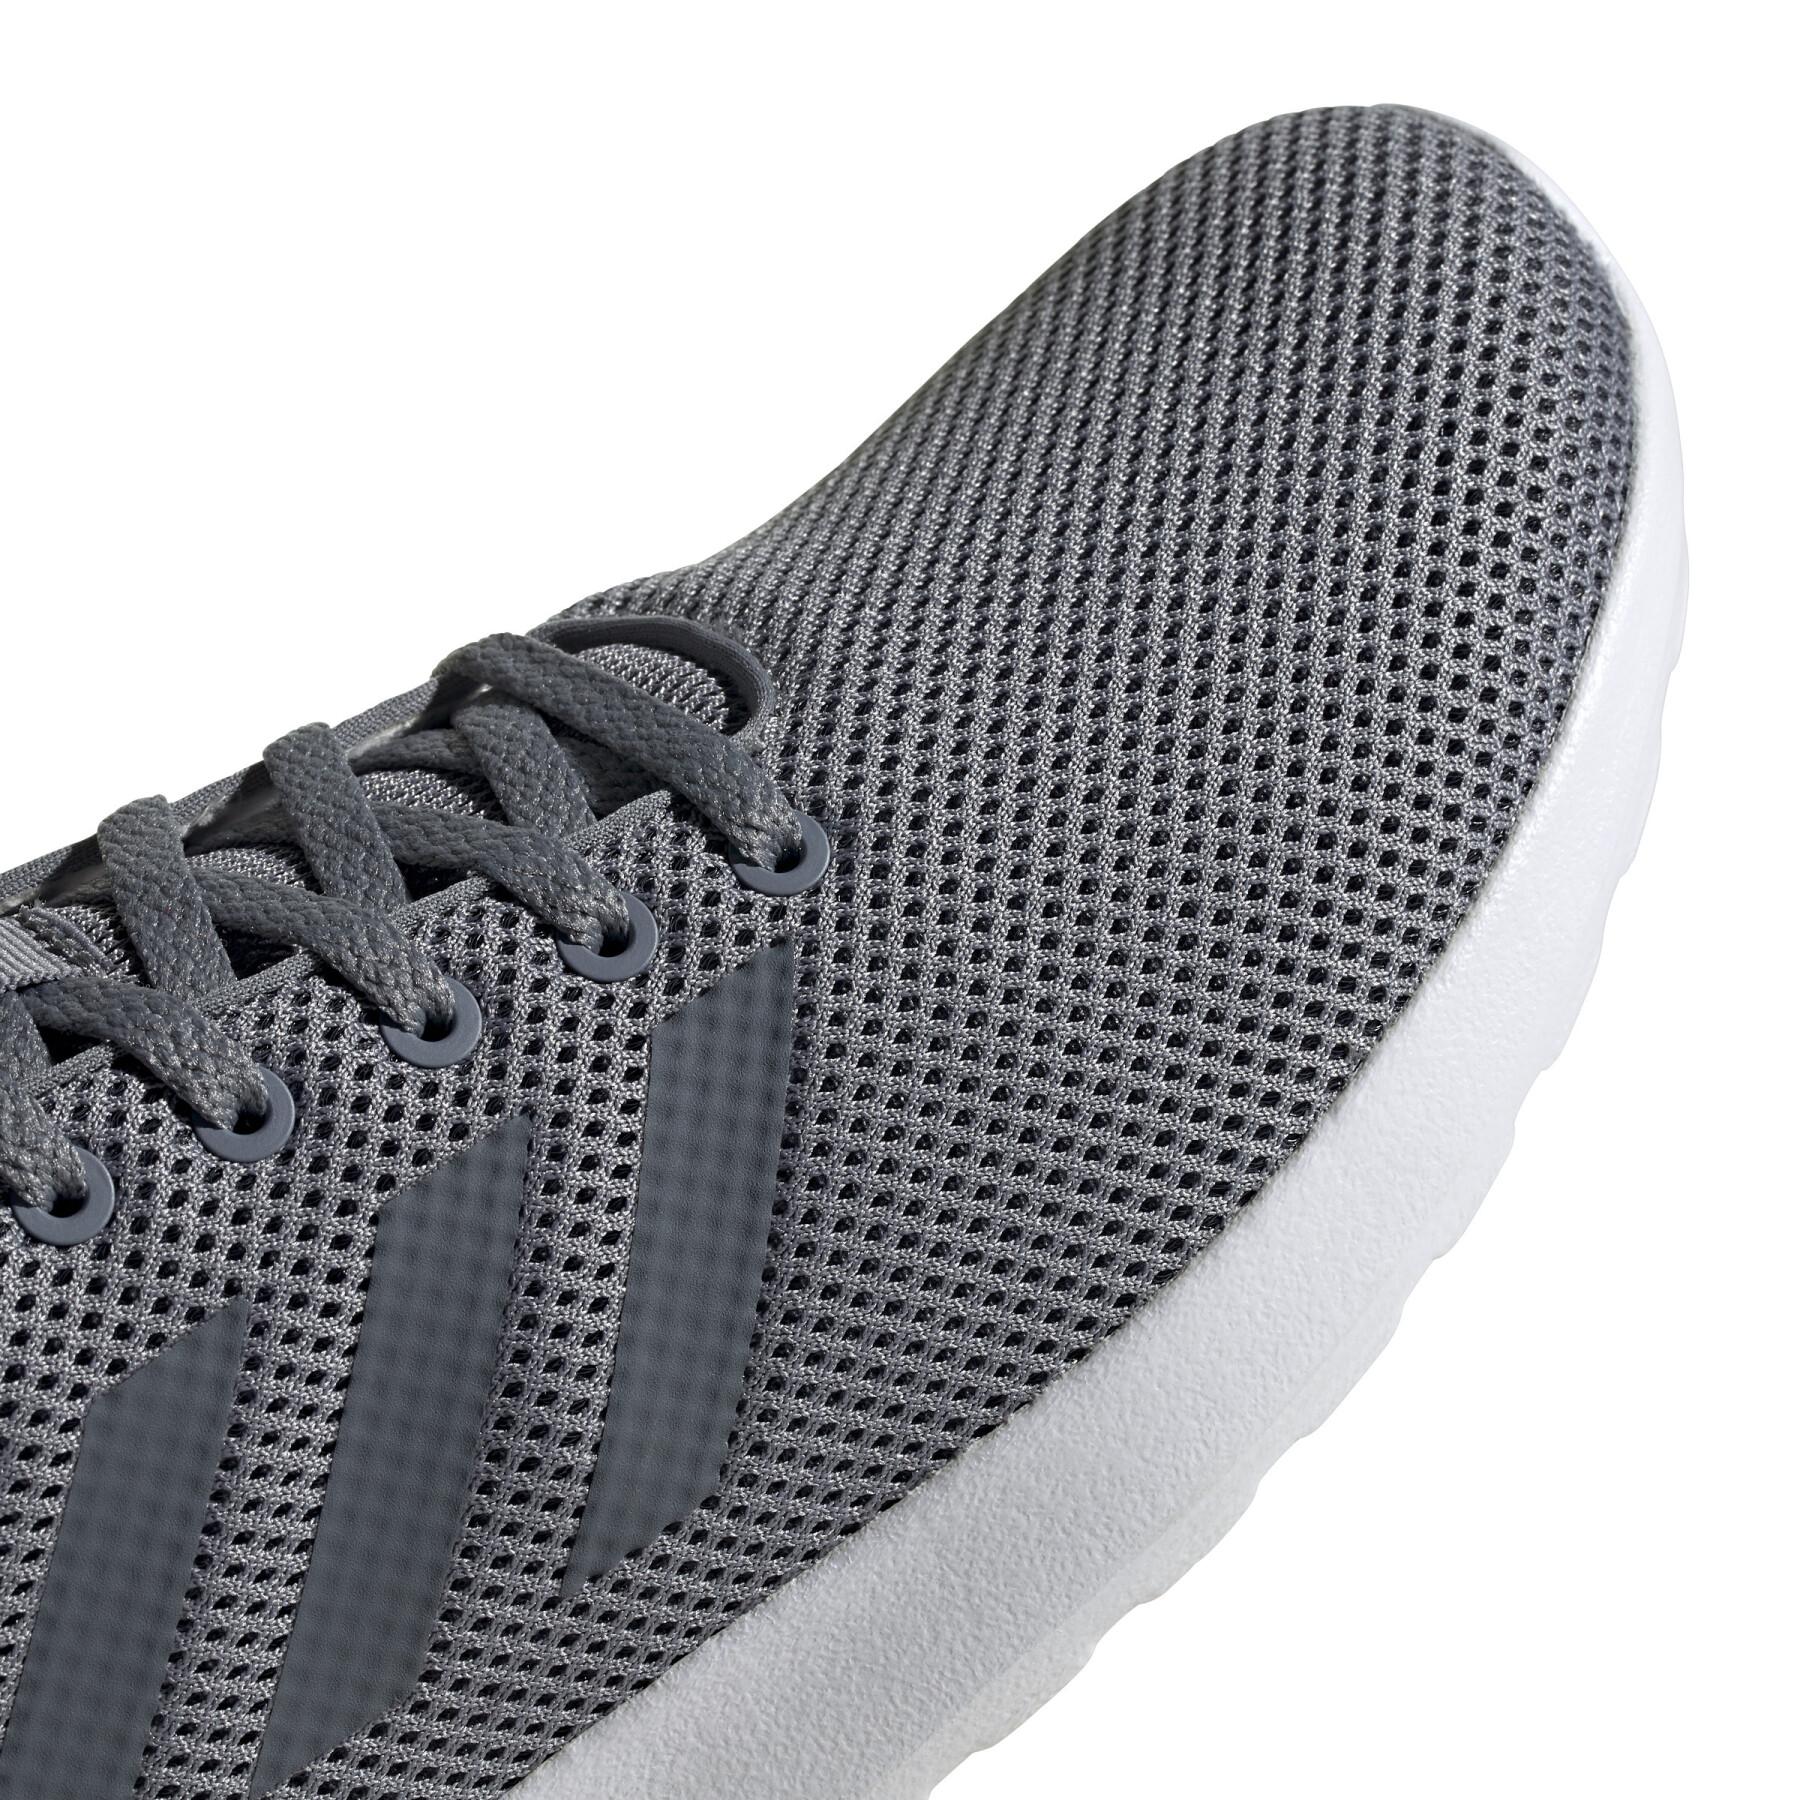 Shoes adidas Lite Racer